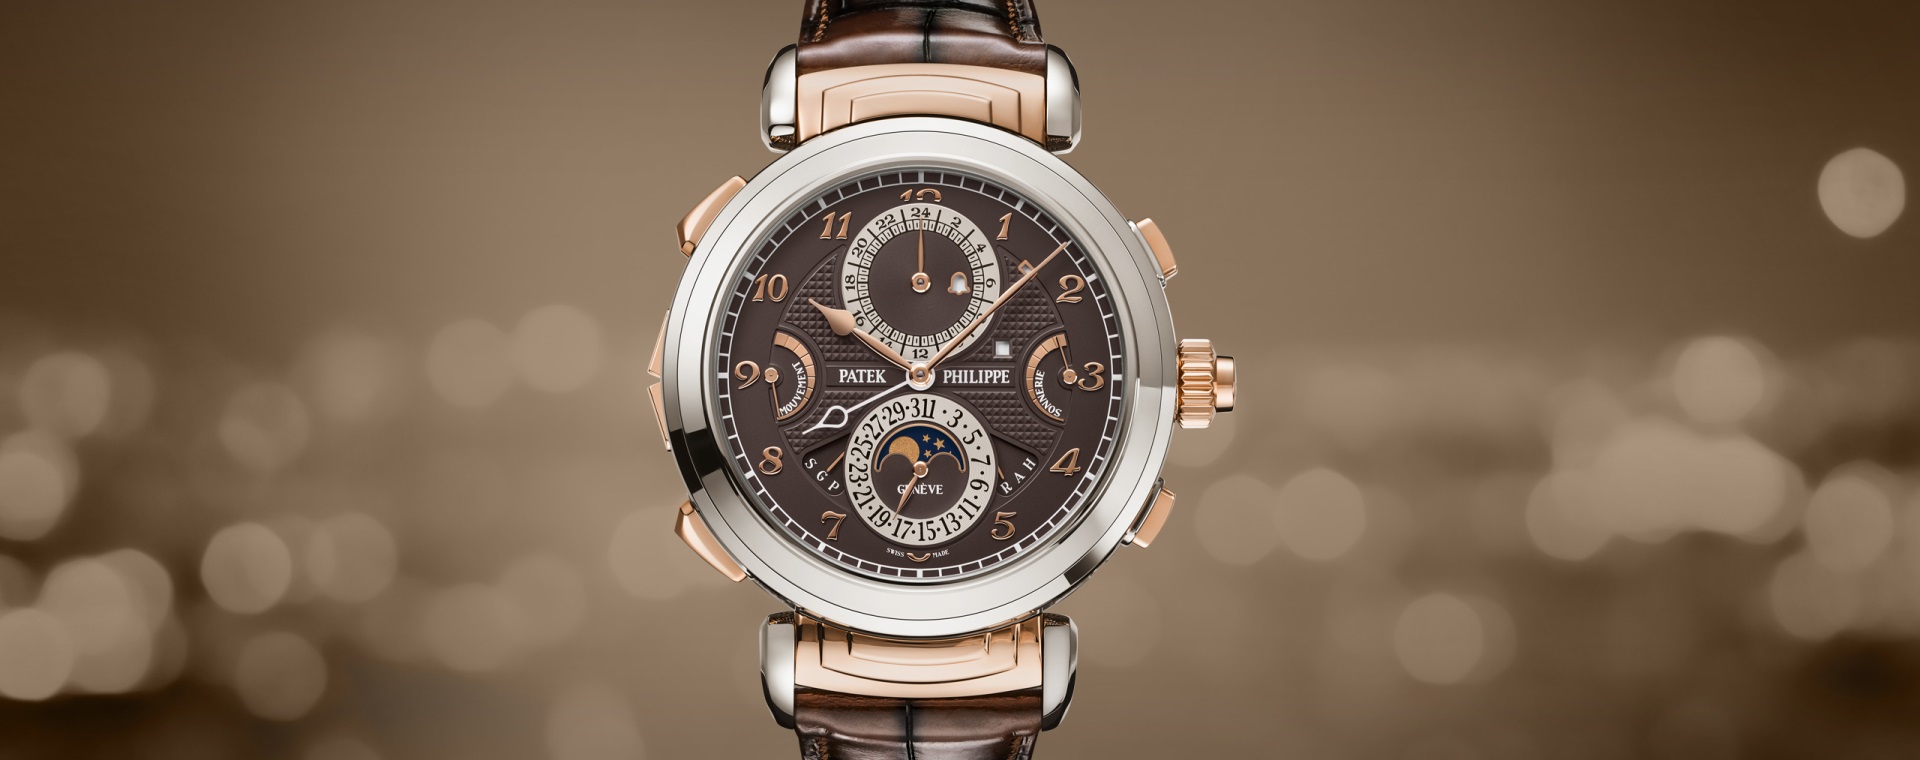 Patek Philippe | Grand Complications Ref. 6300GR-001 White gold and ...